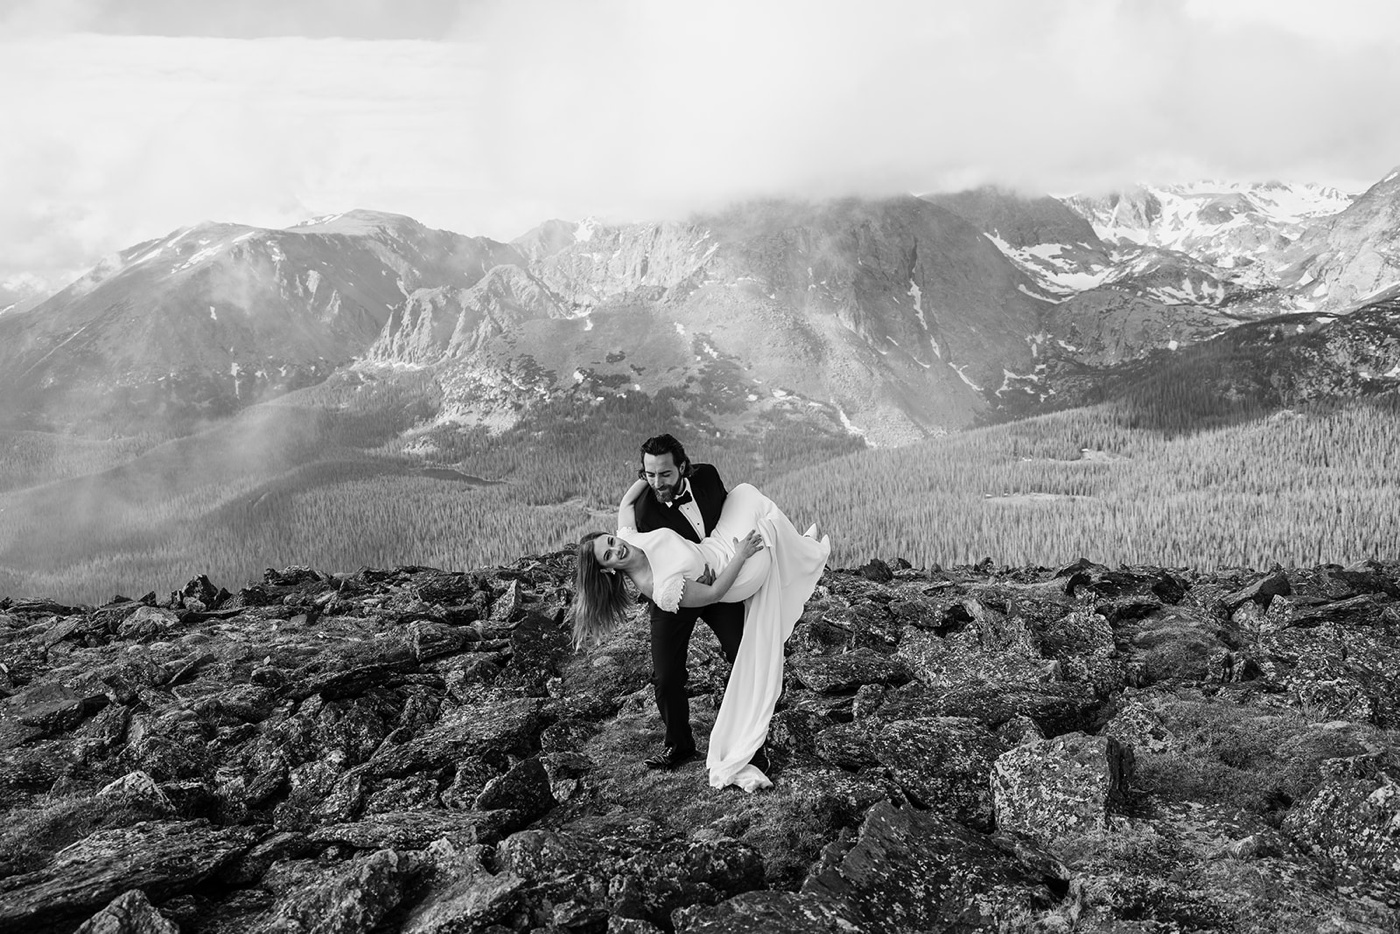 What to know about getting married in Estes Park